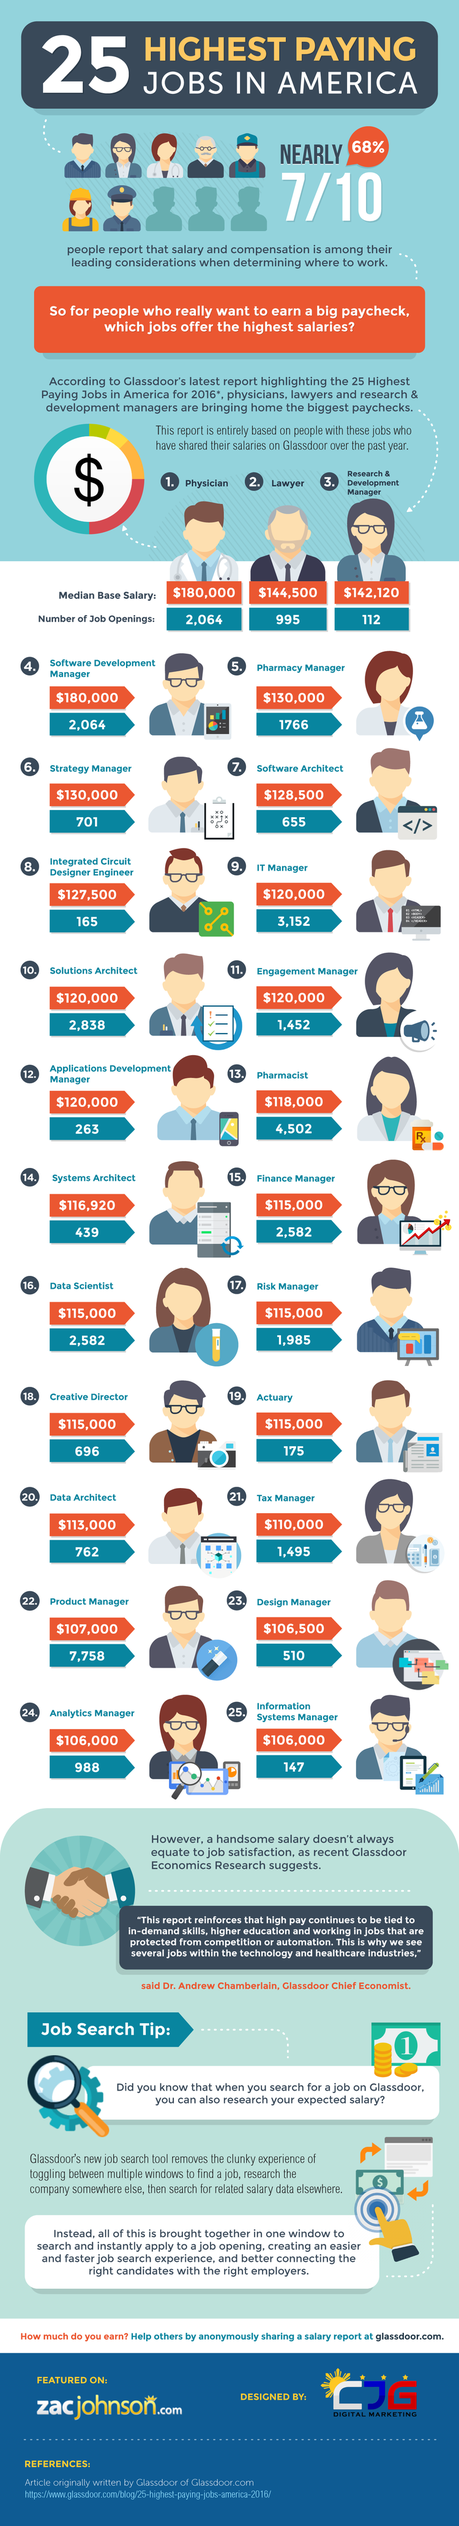 25 Highest Paying Jobs in America 2016 – Infographic